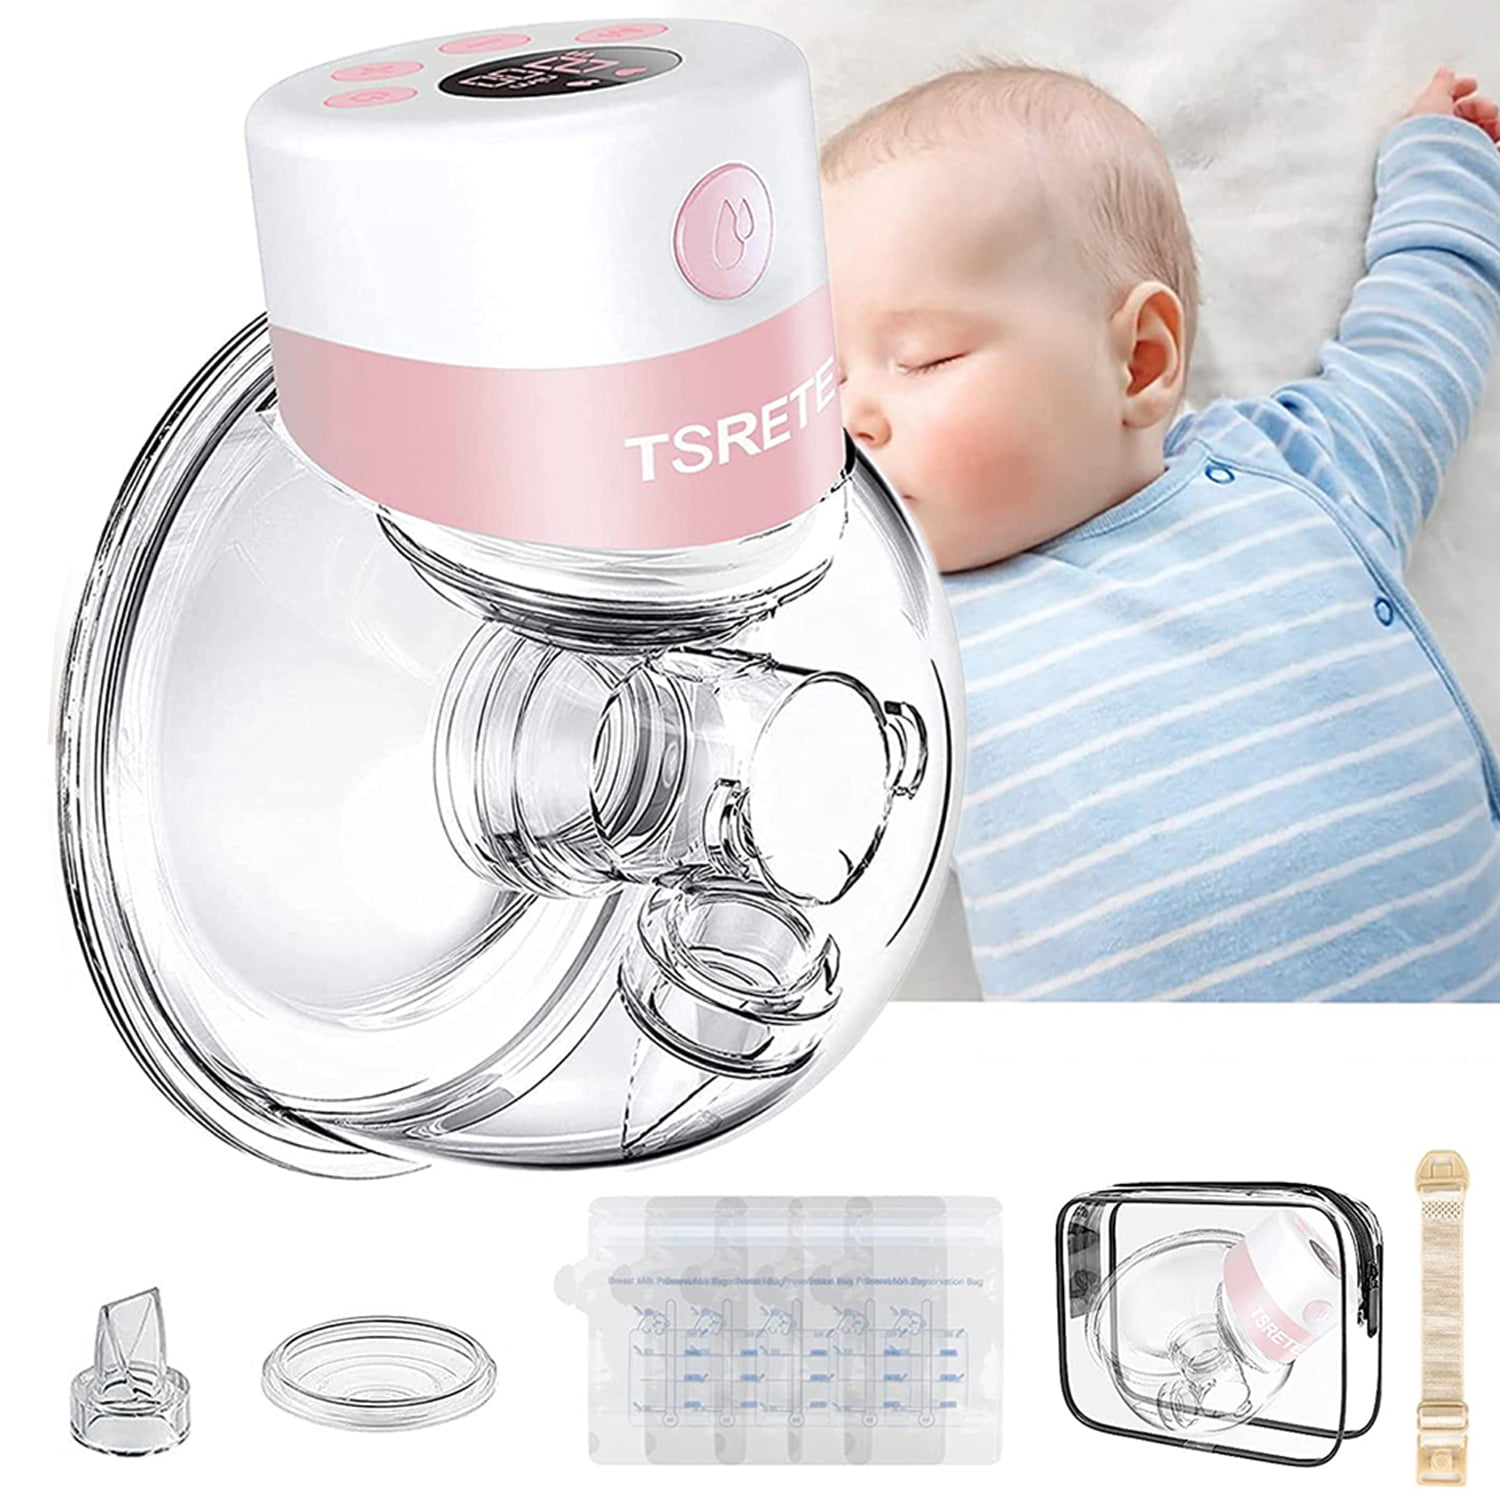 27mm Flange 2 Modes Zybeauty Electric Wearable Breast Pump Portable Wireless Breastfeeding Pump Hand Free Breastpump Rechargeable Milk Pump with LCD Display 9 Adjustable Suction Level 